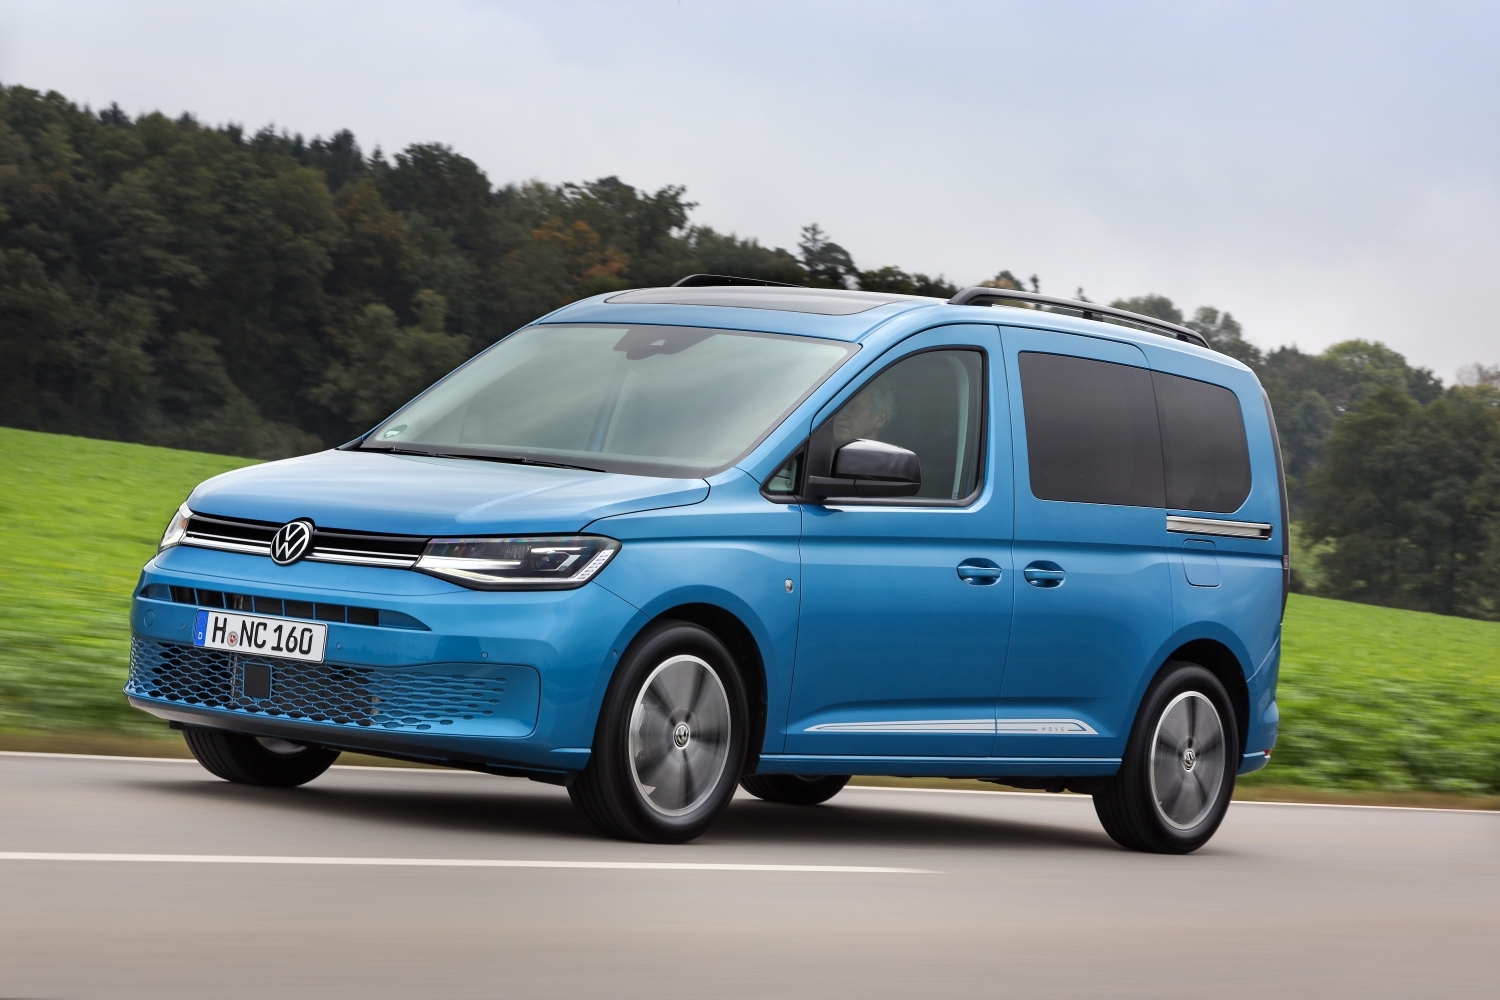 New Caddy - Volkswagen shows there's Life in MPVs - Just Auto